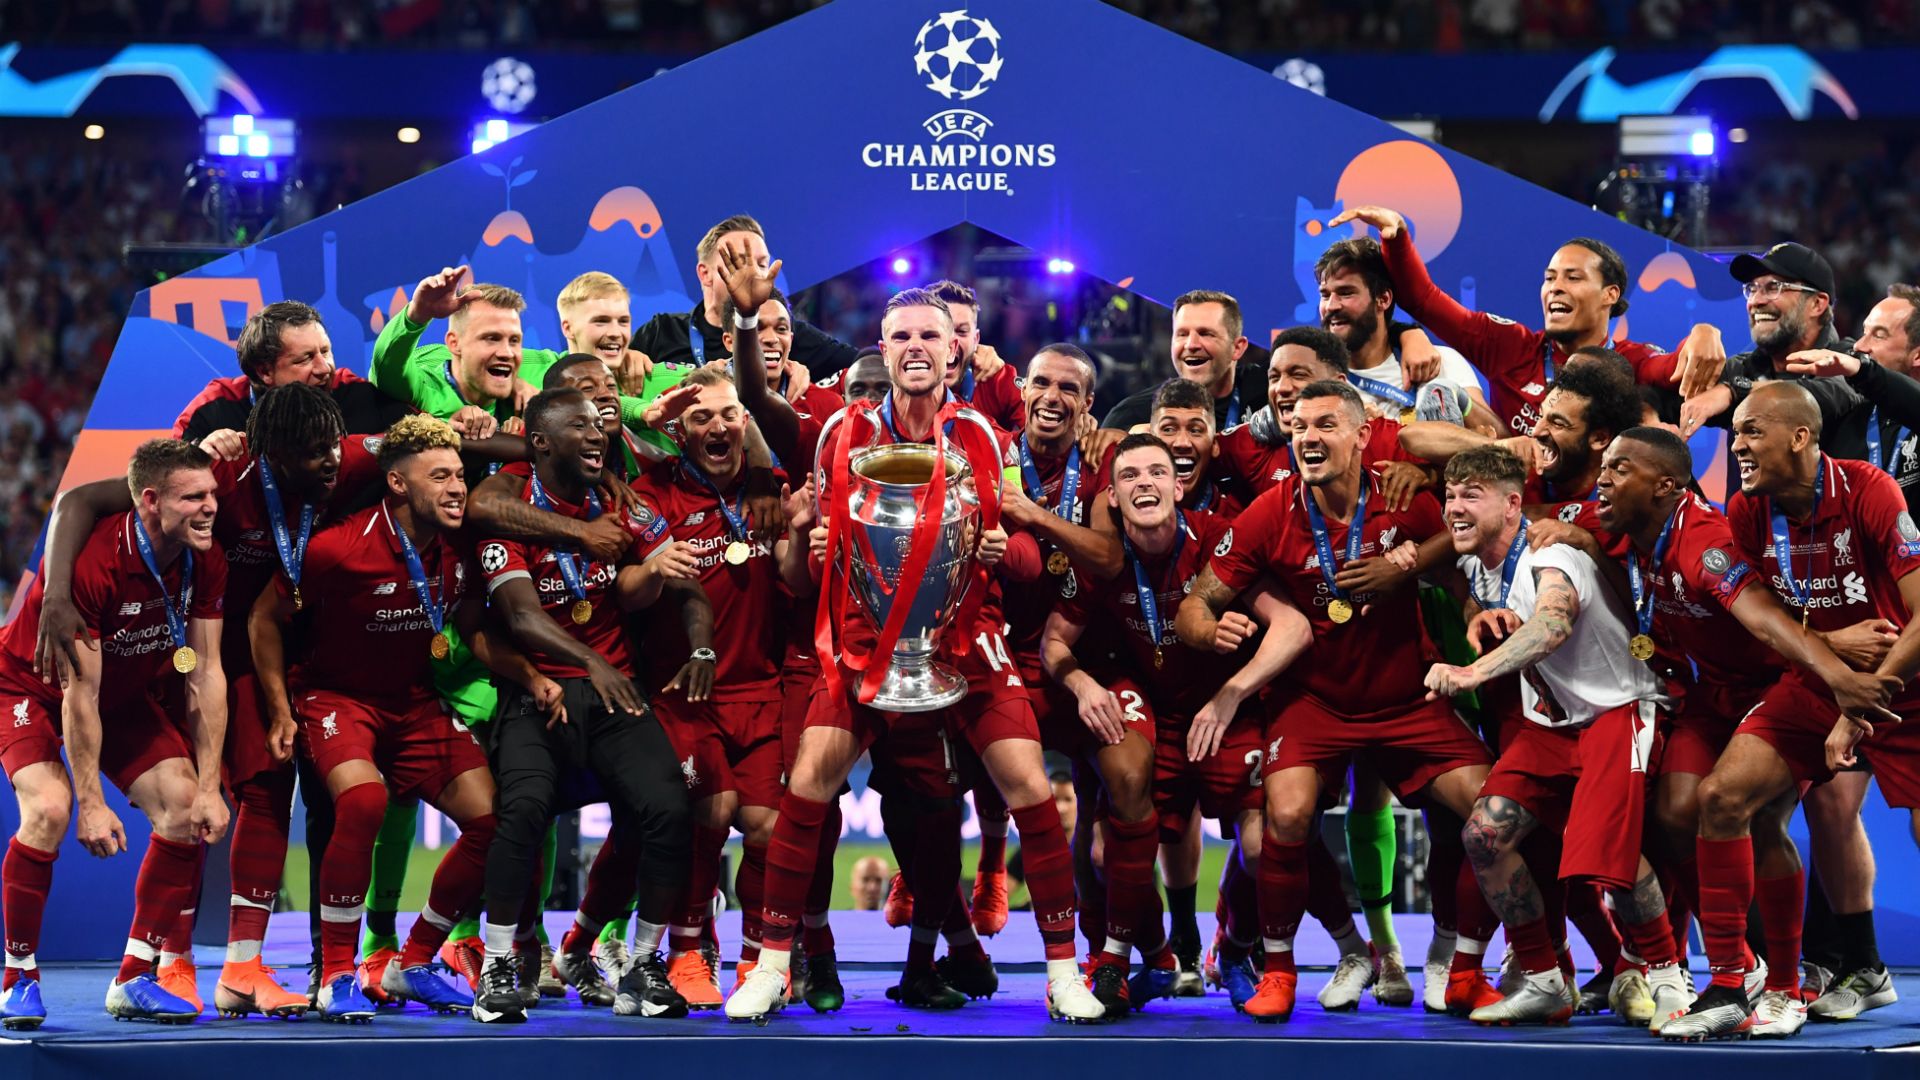 Liverpool Will Win More Titles After Champions League - Liverpool Fc Champions League 2019 - HD Wallpaper 